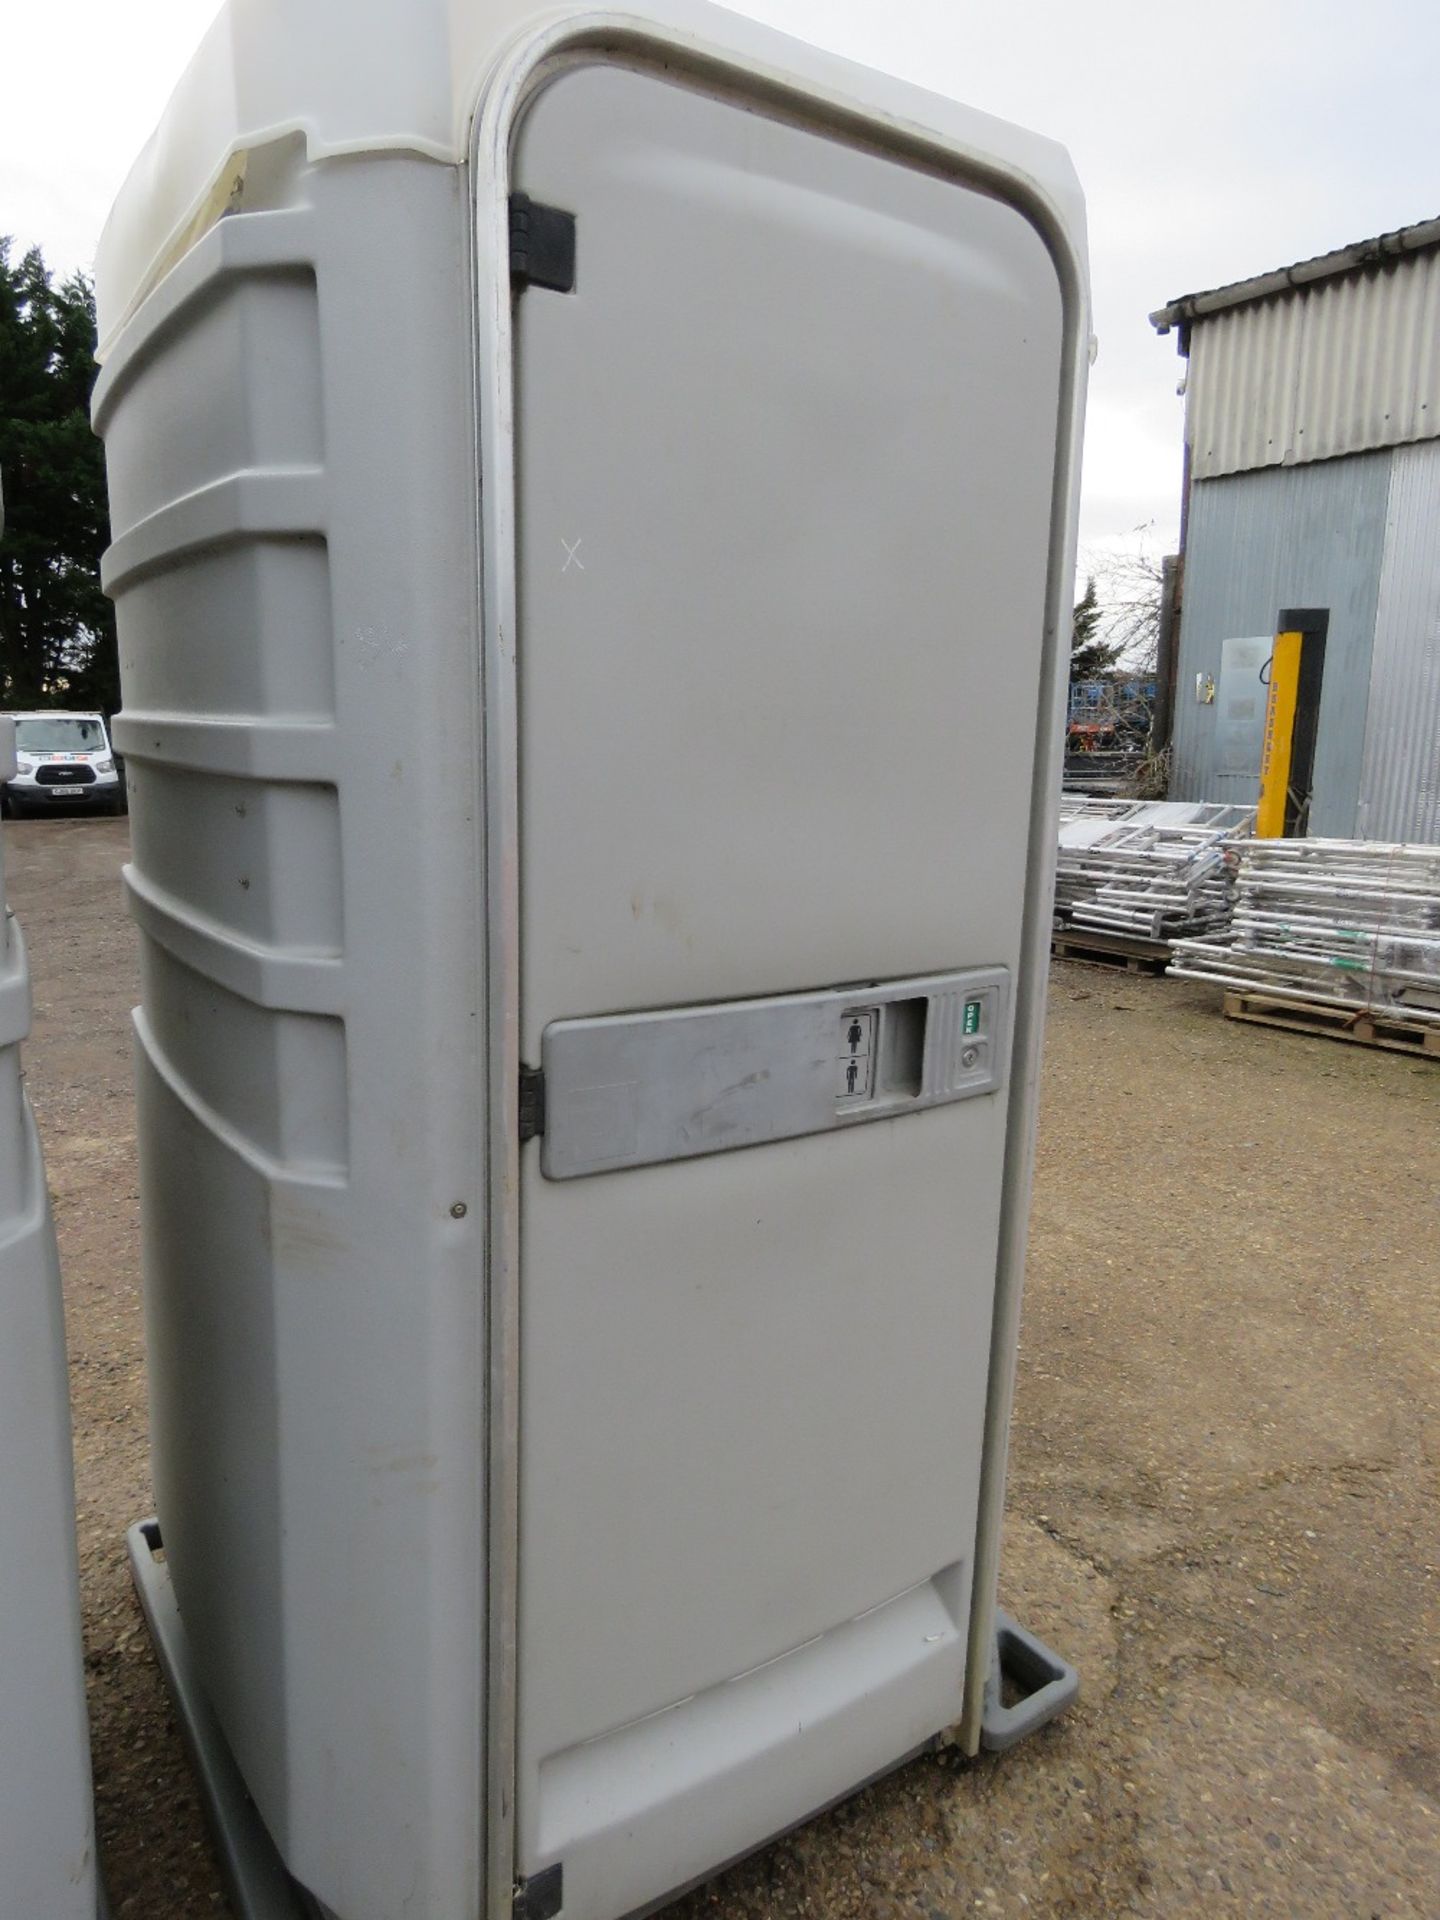 PORTABLE SITE TOILET. DIRECT FROM LOCAL COMPANY.